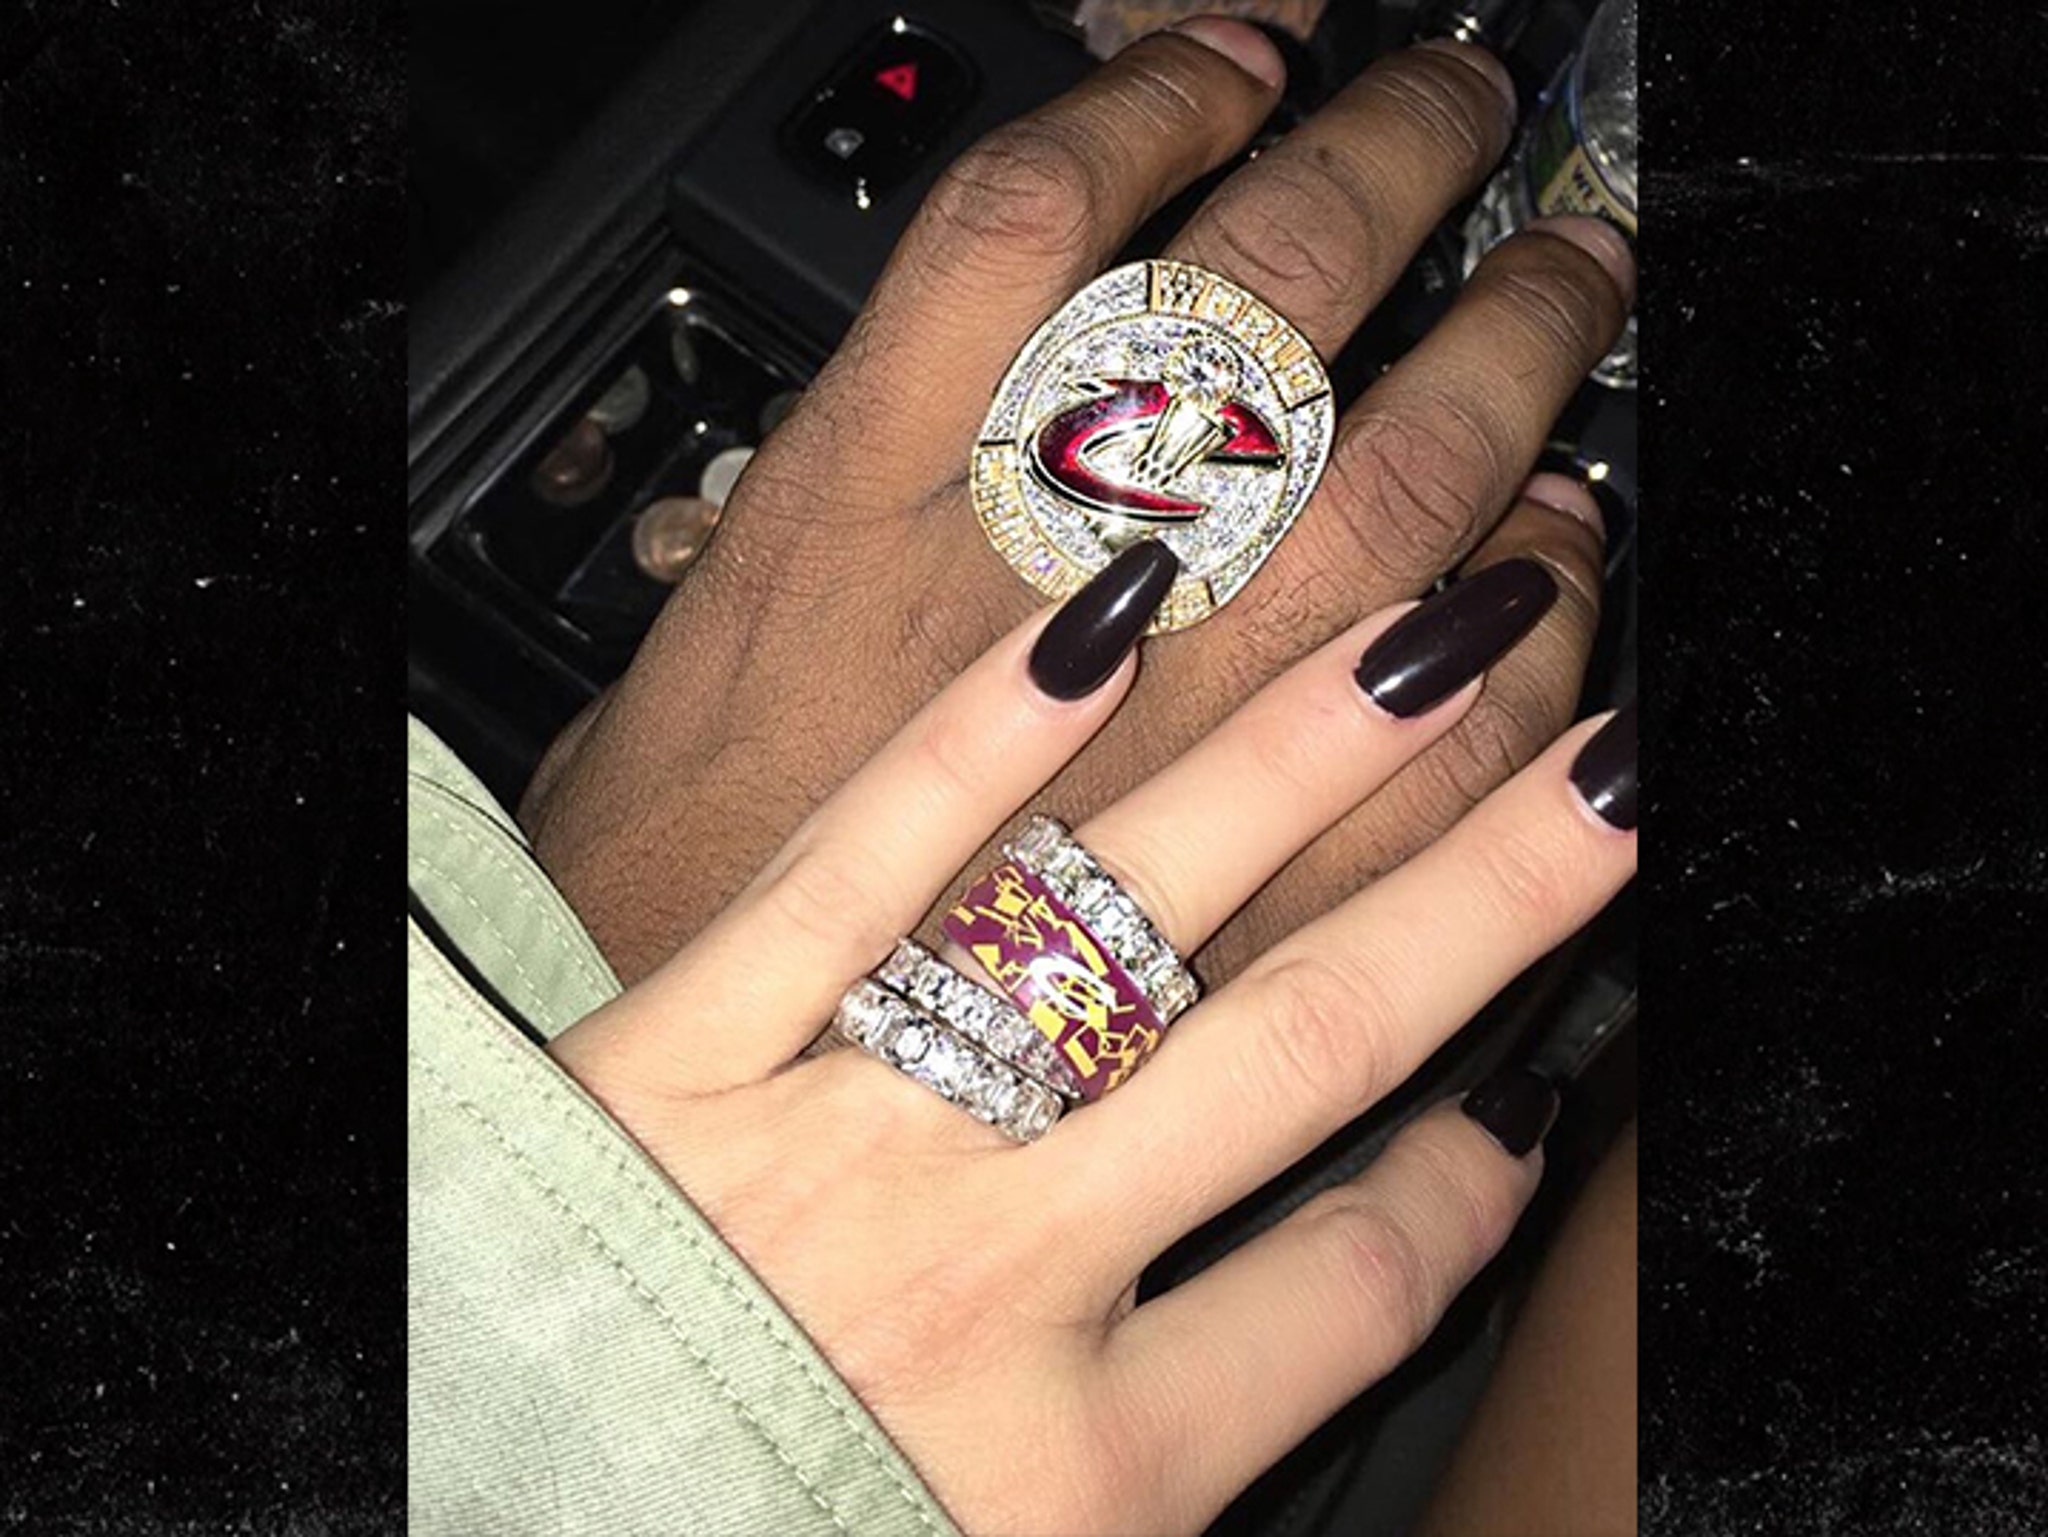 Is Khloe Kardashian Engaged? — Fans Are Convinced Because...